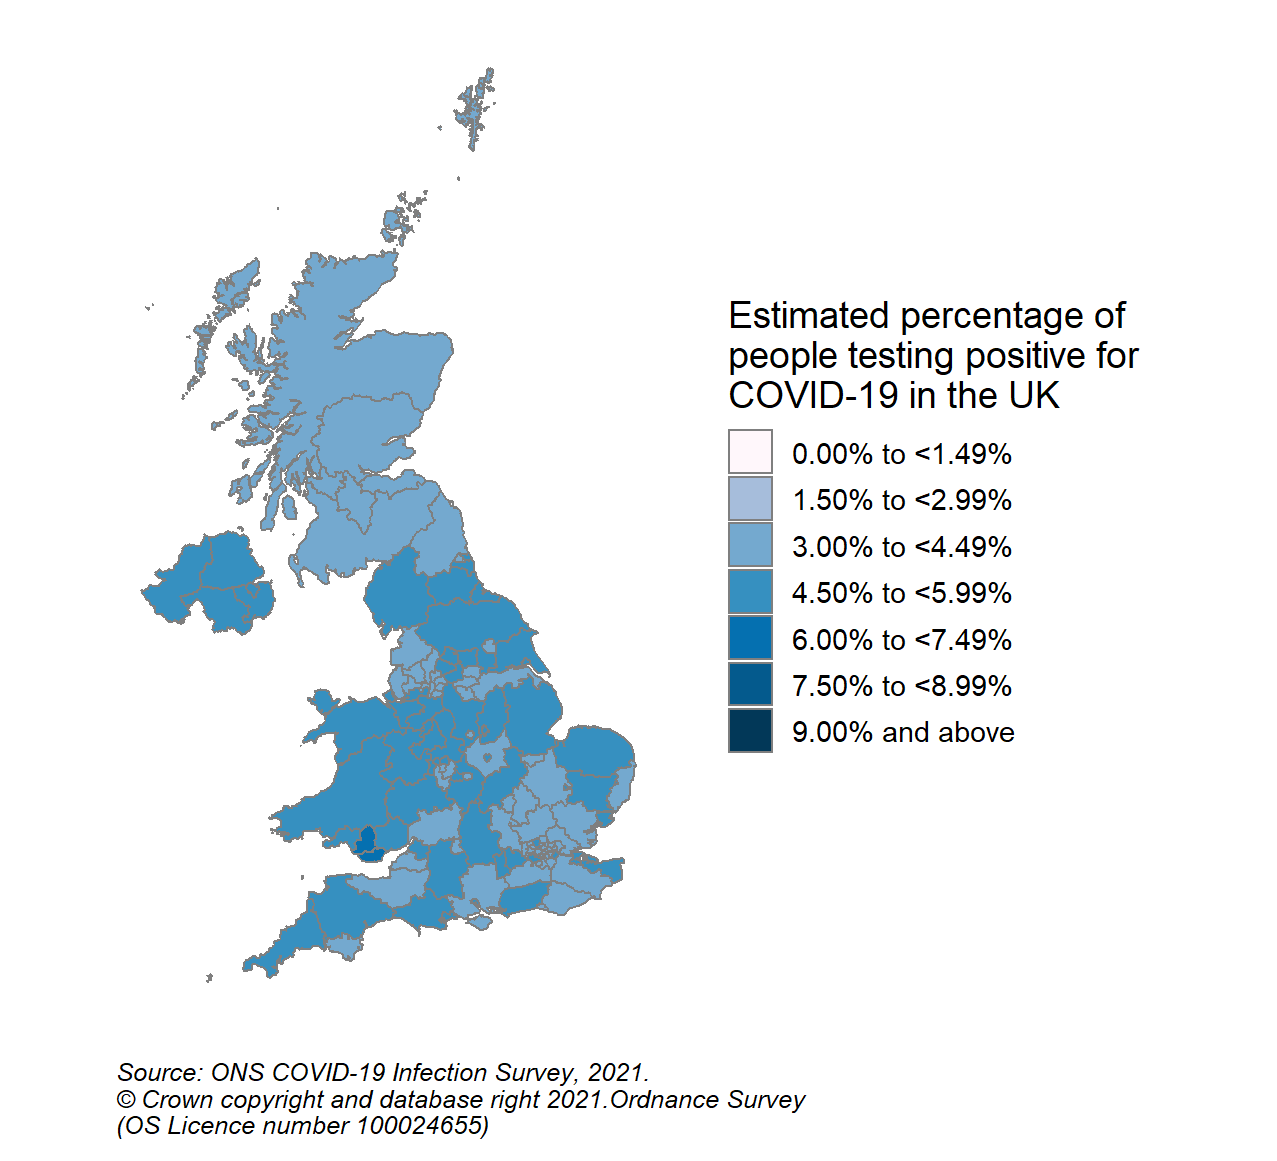 This colour coded map of the UK shows the modelled estimates of the percentage of the private residential population testing positive for COVID-19, by COVID-19 Infection Survey sub-regions. In Scotland, these sub-regions are comprised of Health Boards. The regions are: 123 - NHS Grampian, NHS Highland, NHS Orkney, NHS Shetland and NHS Western Isles, 124 - NHS Fife, NHS Forth Valley and NHS Tayside, 125 - NHS Greater Glasgow & Clyde, 126 - NHS Lothian, 127 - NHS Lanarkshire, 128 - NHS Ayrshire & Arran, NHS Borders and NHS Dumfries & Galloway.  The sub-region with the highest modelled estimate for the percentage of people testing positive was CIS Region 127 (NHS Lanarkshire) at 4.48% (95% credible interval: 3.83% to 5.26%).  The sub-region with the lowest modelled estimate was CIS Region 126 (NHS Lothian), at 4.01% (95% credible interval: 3.41% to 4.64%).